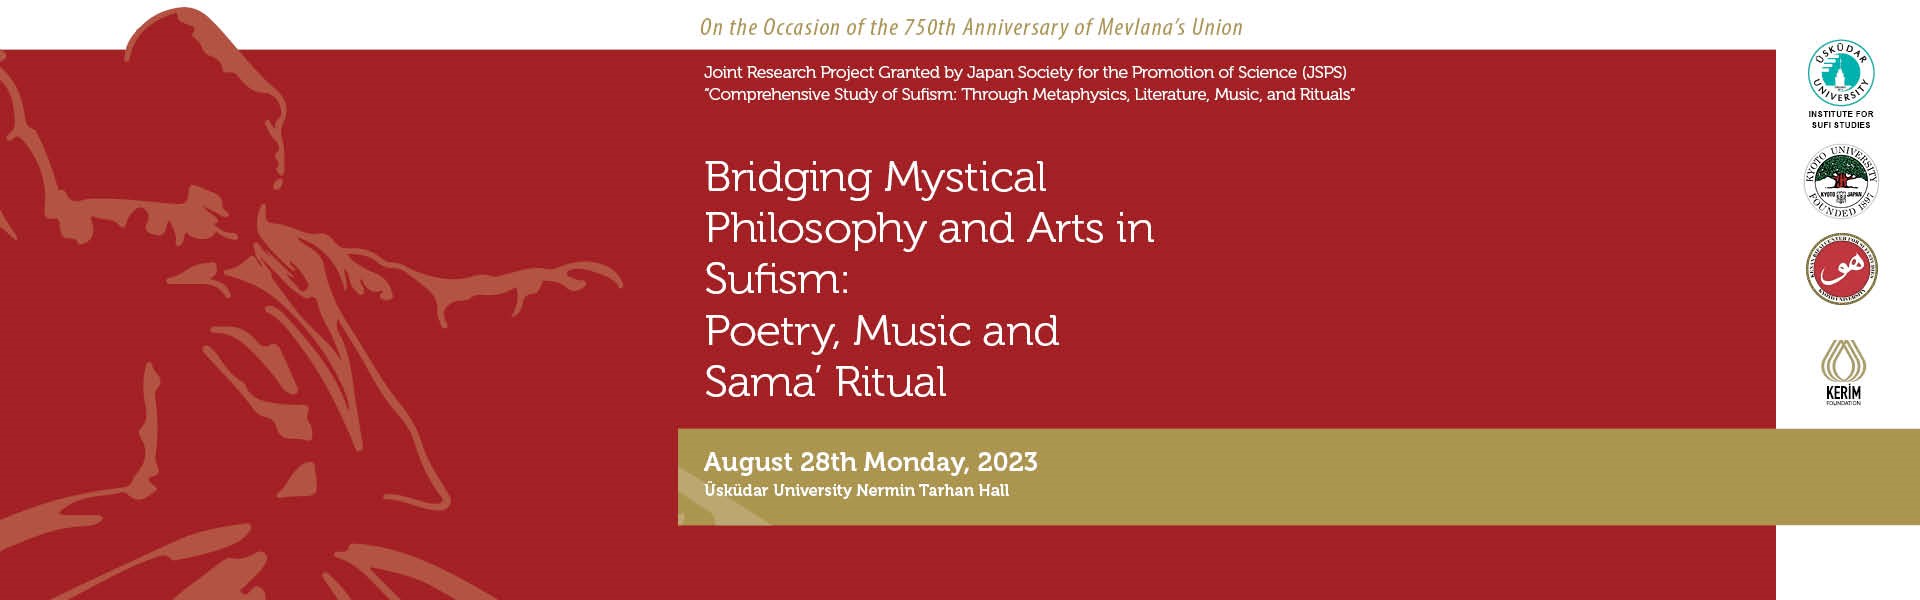 BRIDGING MYSTICAL PHILOSOPHY AND ARTS IN SUFISM: POETRY, MUSIC AND SAMA’ RITUALINTERNATIONAL SYMPOSIUM TITLED